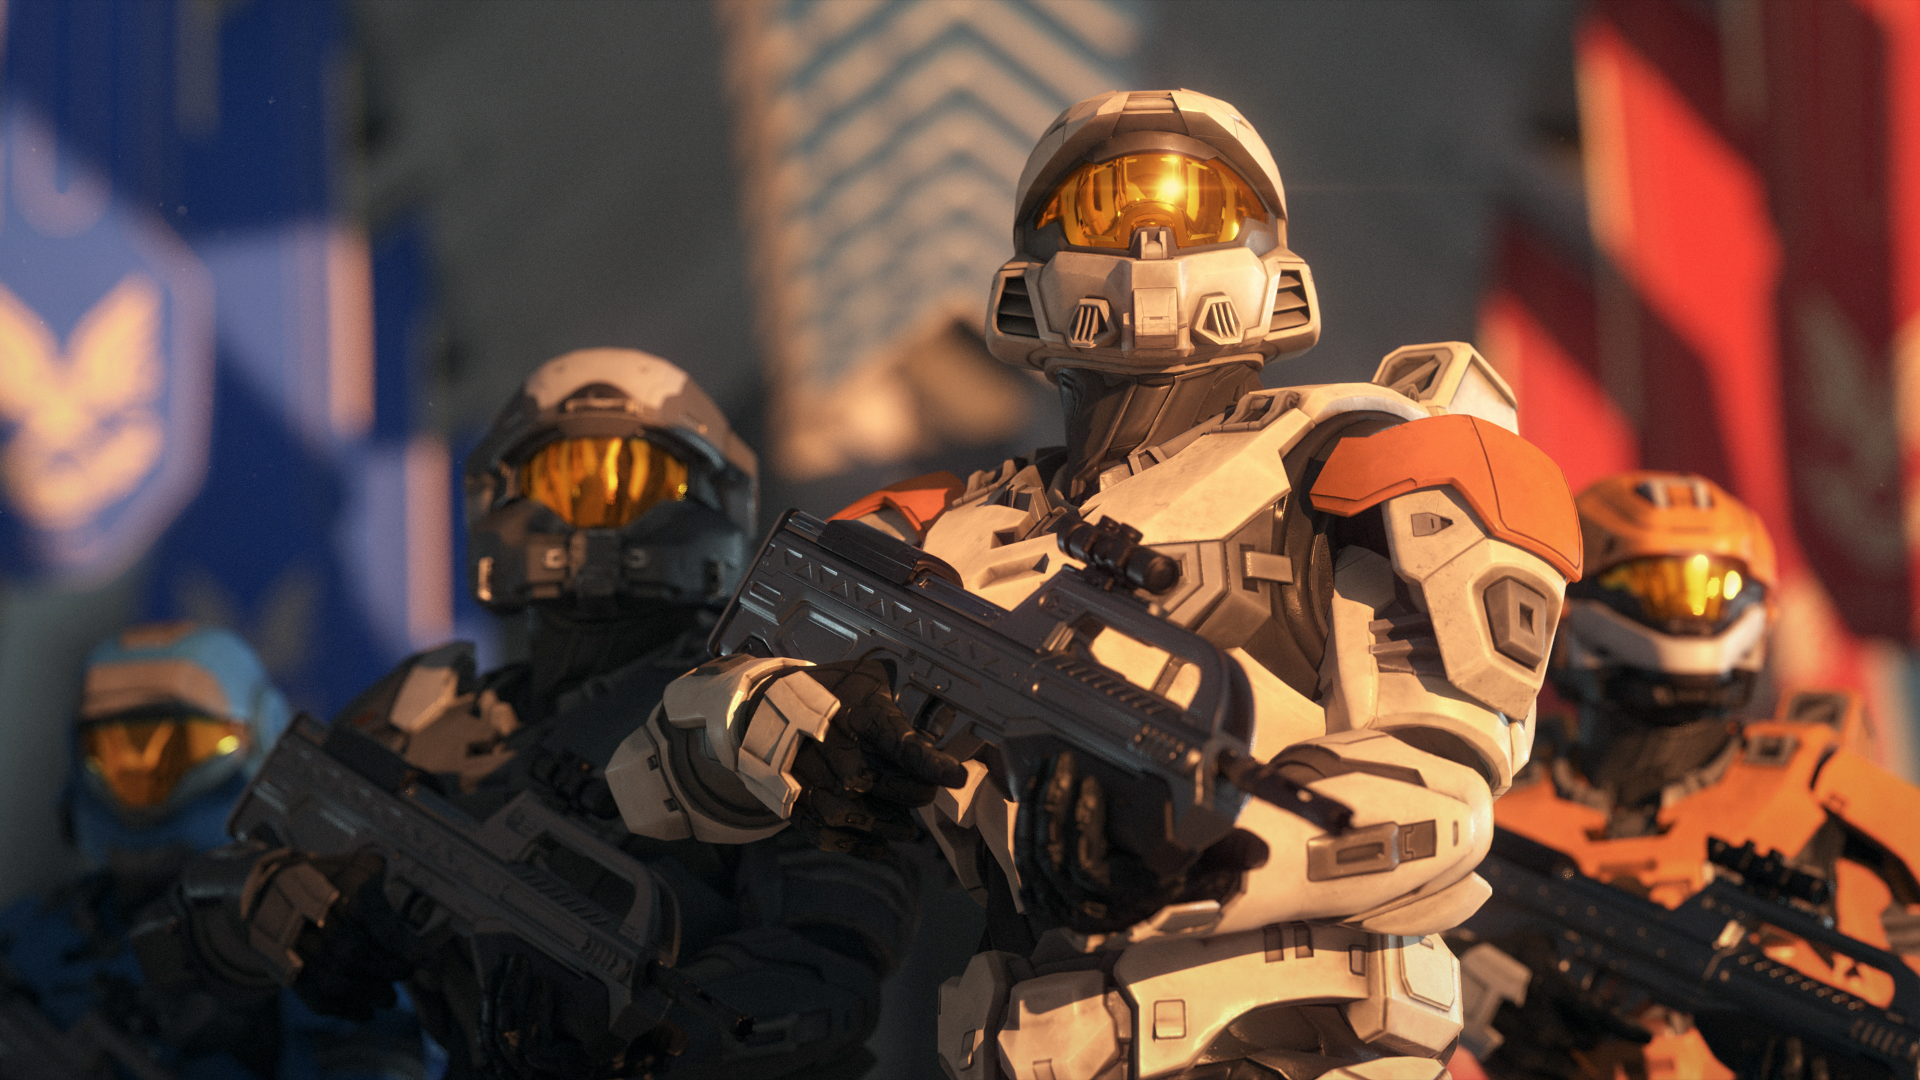 Halo Infinite Spartans in a heroic pose looking up as the sun glares off their visors and UNSC banners colored red and blue hang behind them out of focus.